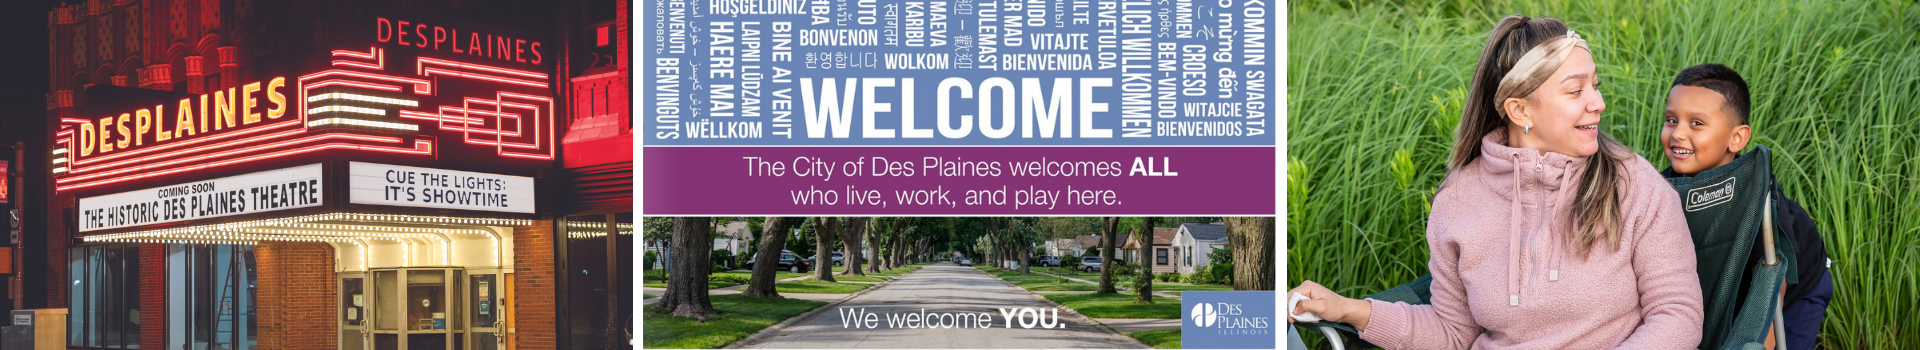 Explore Our City Interior page banner